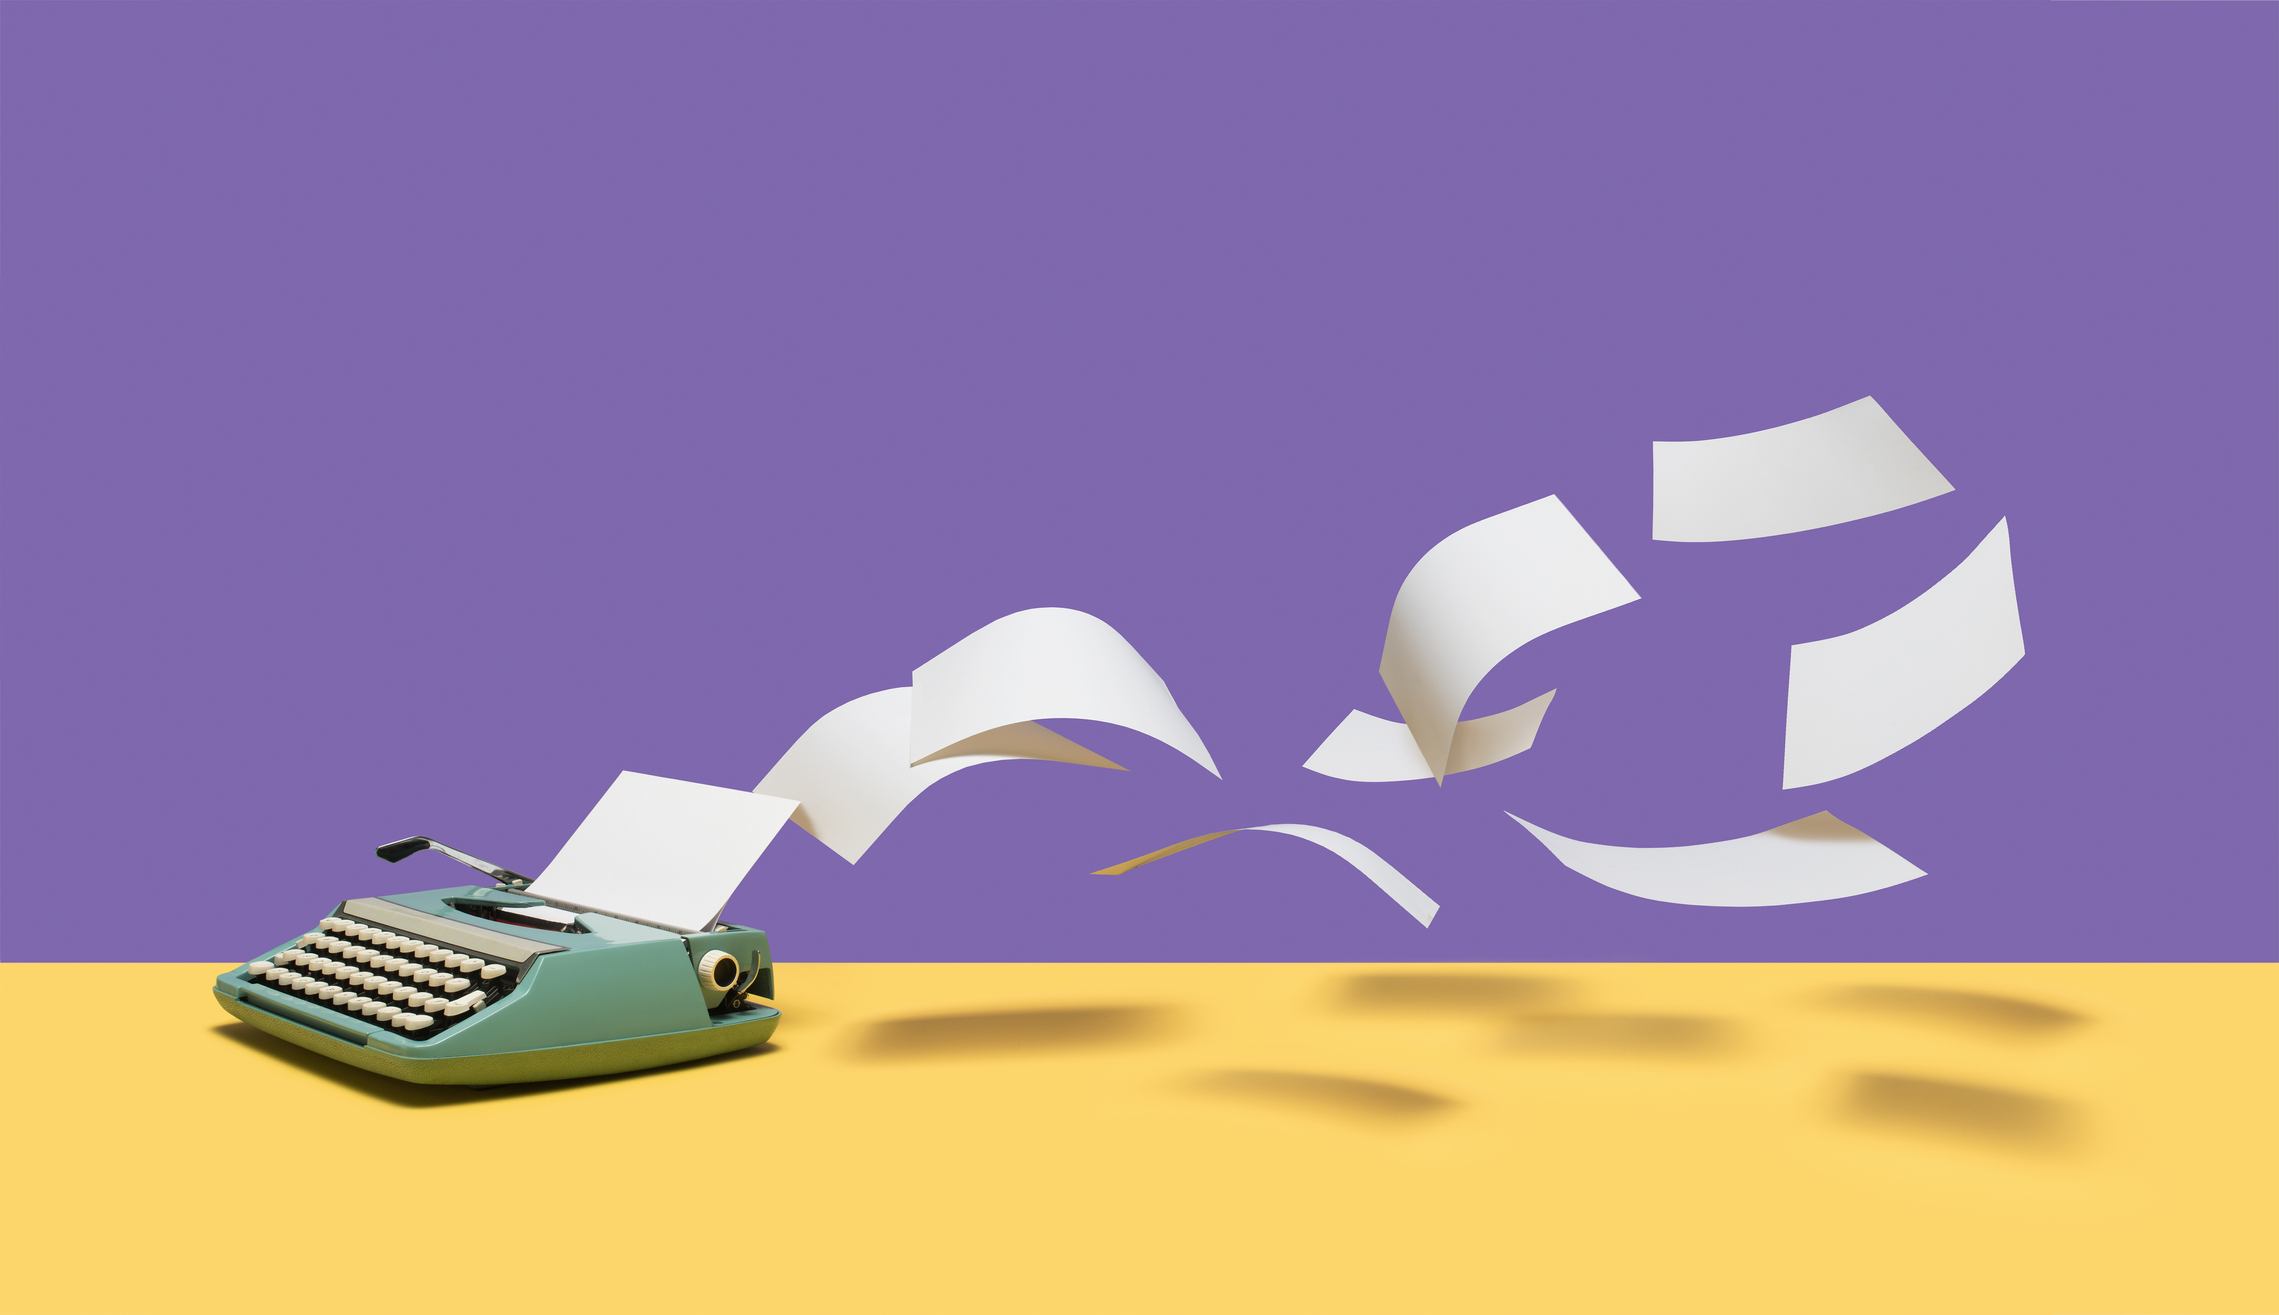 Sheets of blank white paper flying out of vintage, manual typewriter on yellow surface, purple background